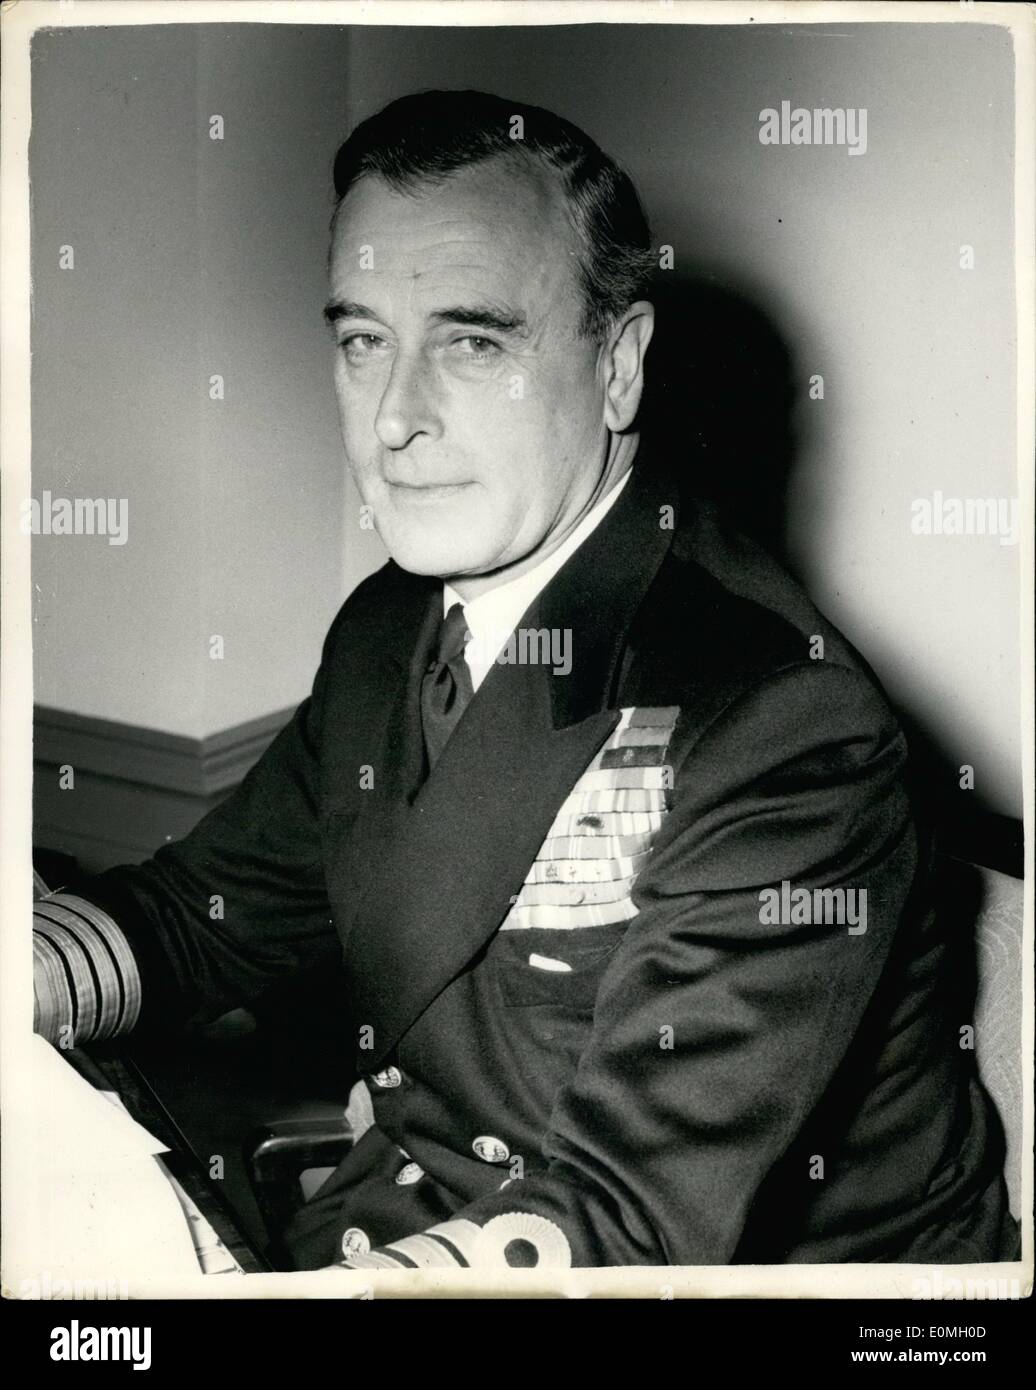 Apr. 04, 1955 - Earl Mountbatten Assumes his duties as First Sea Lord: Earl Mountbatten, 57, a cousin of Queen Elizabeth II, and uncle of the Duke of Edinburgh, has assumed his duties as First Sea Lord. Until recently he commanded the British Mediterranean Fleet and the Mediterranean naval and air forces of North Atlantic Treaty Organization Countries. For the last month he has been making a round of inspections of naval bases and Admiralty departments in all parts of the country. Photo Shows Admiral Earl Mountbatten of Burma, pictured in his room at the Admiralty this morning. Stock Photo